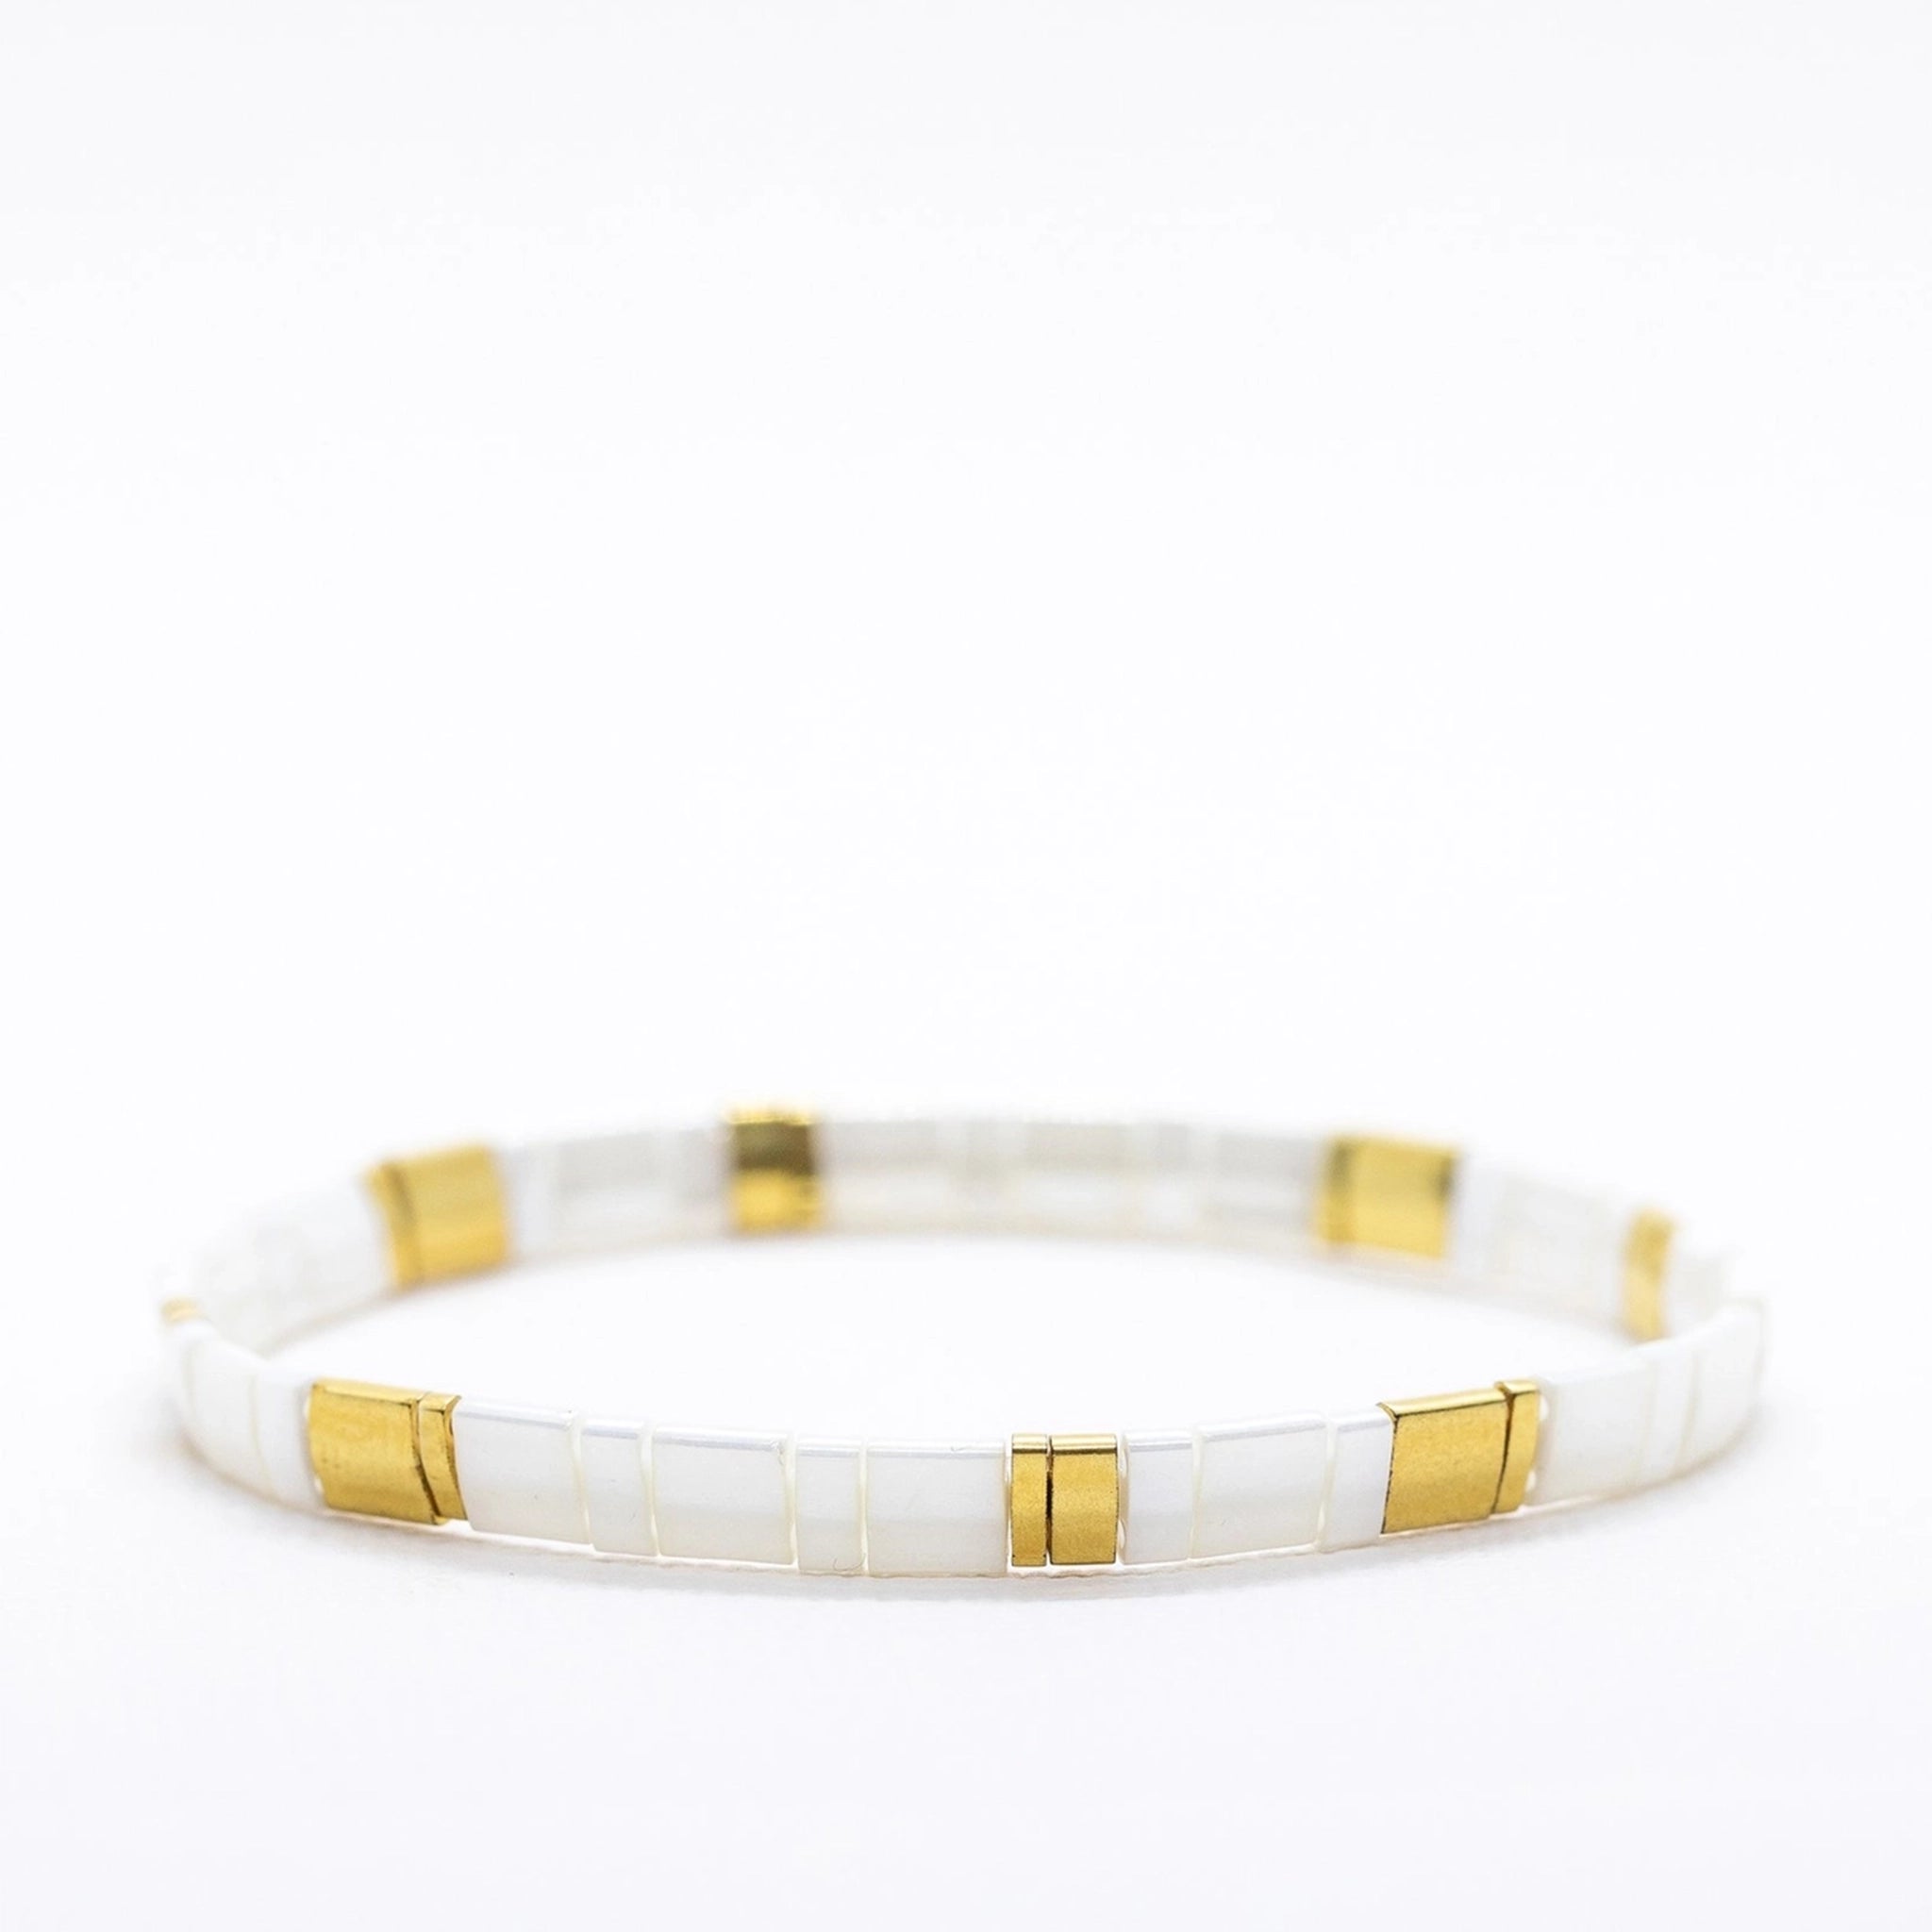 On a white background is a white and gold alternating bead bracelet. 